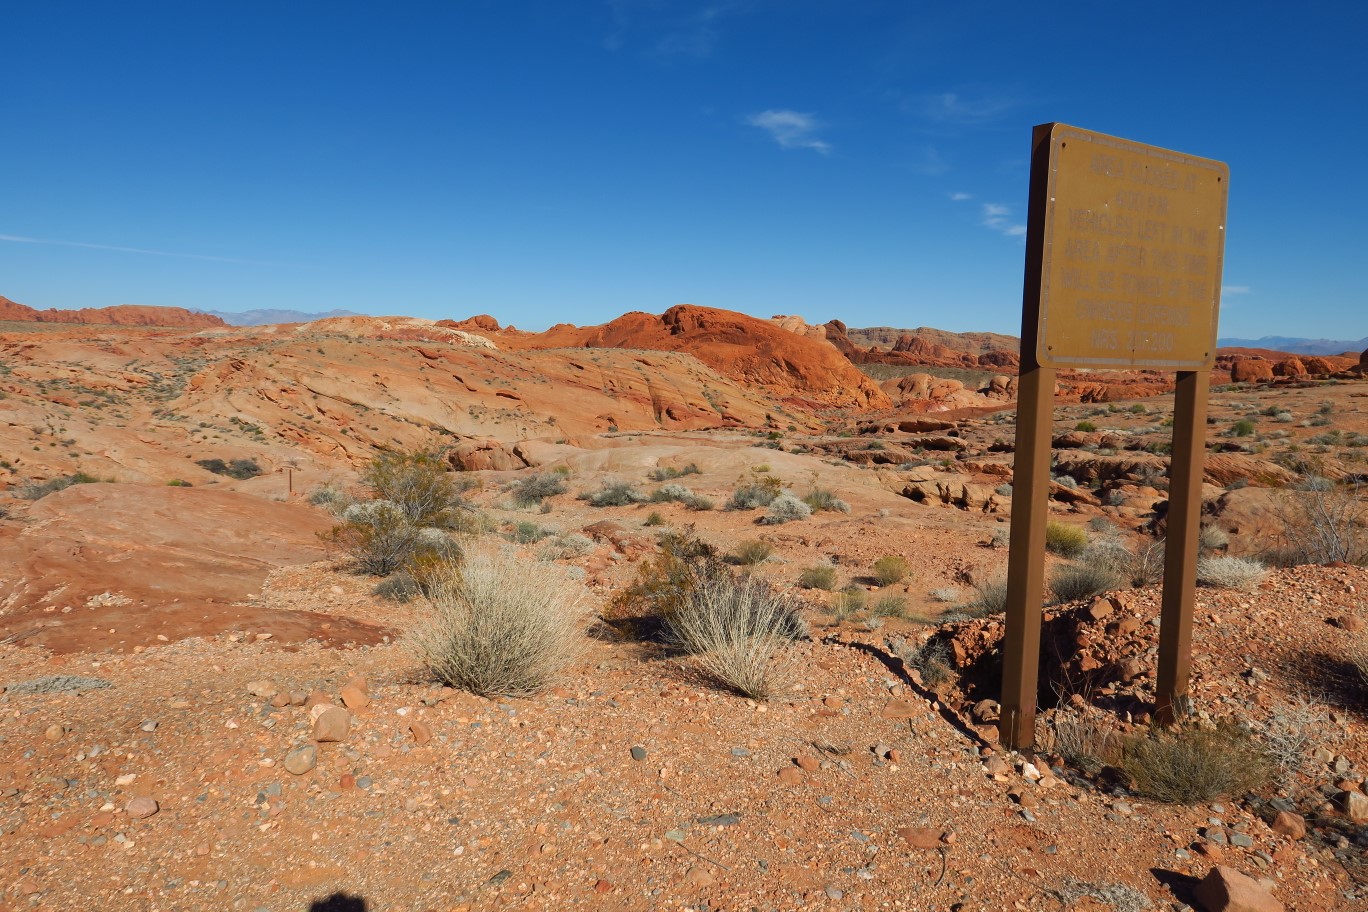 04-sign_is_where_'trail'_exists-head_towards_trail_marker